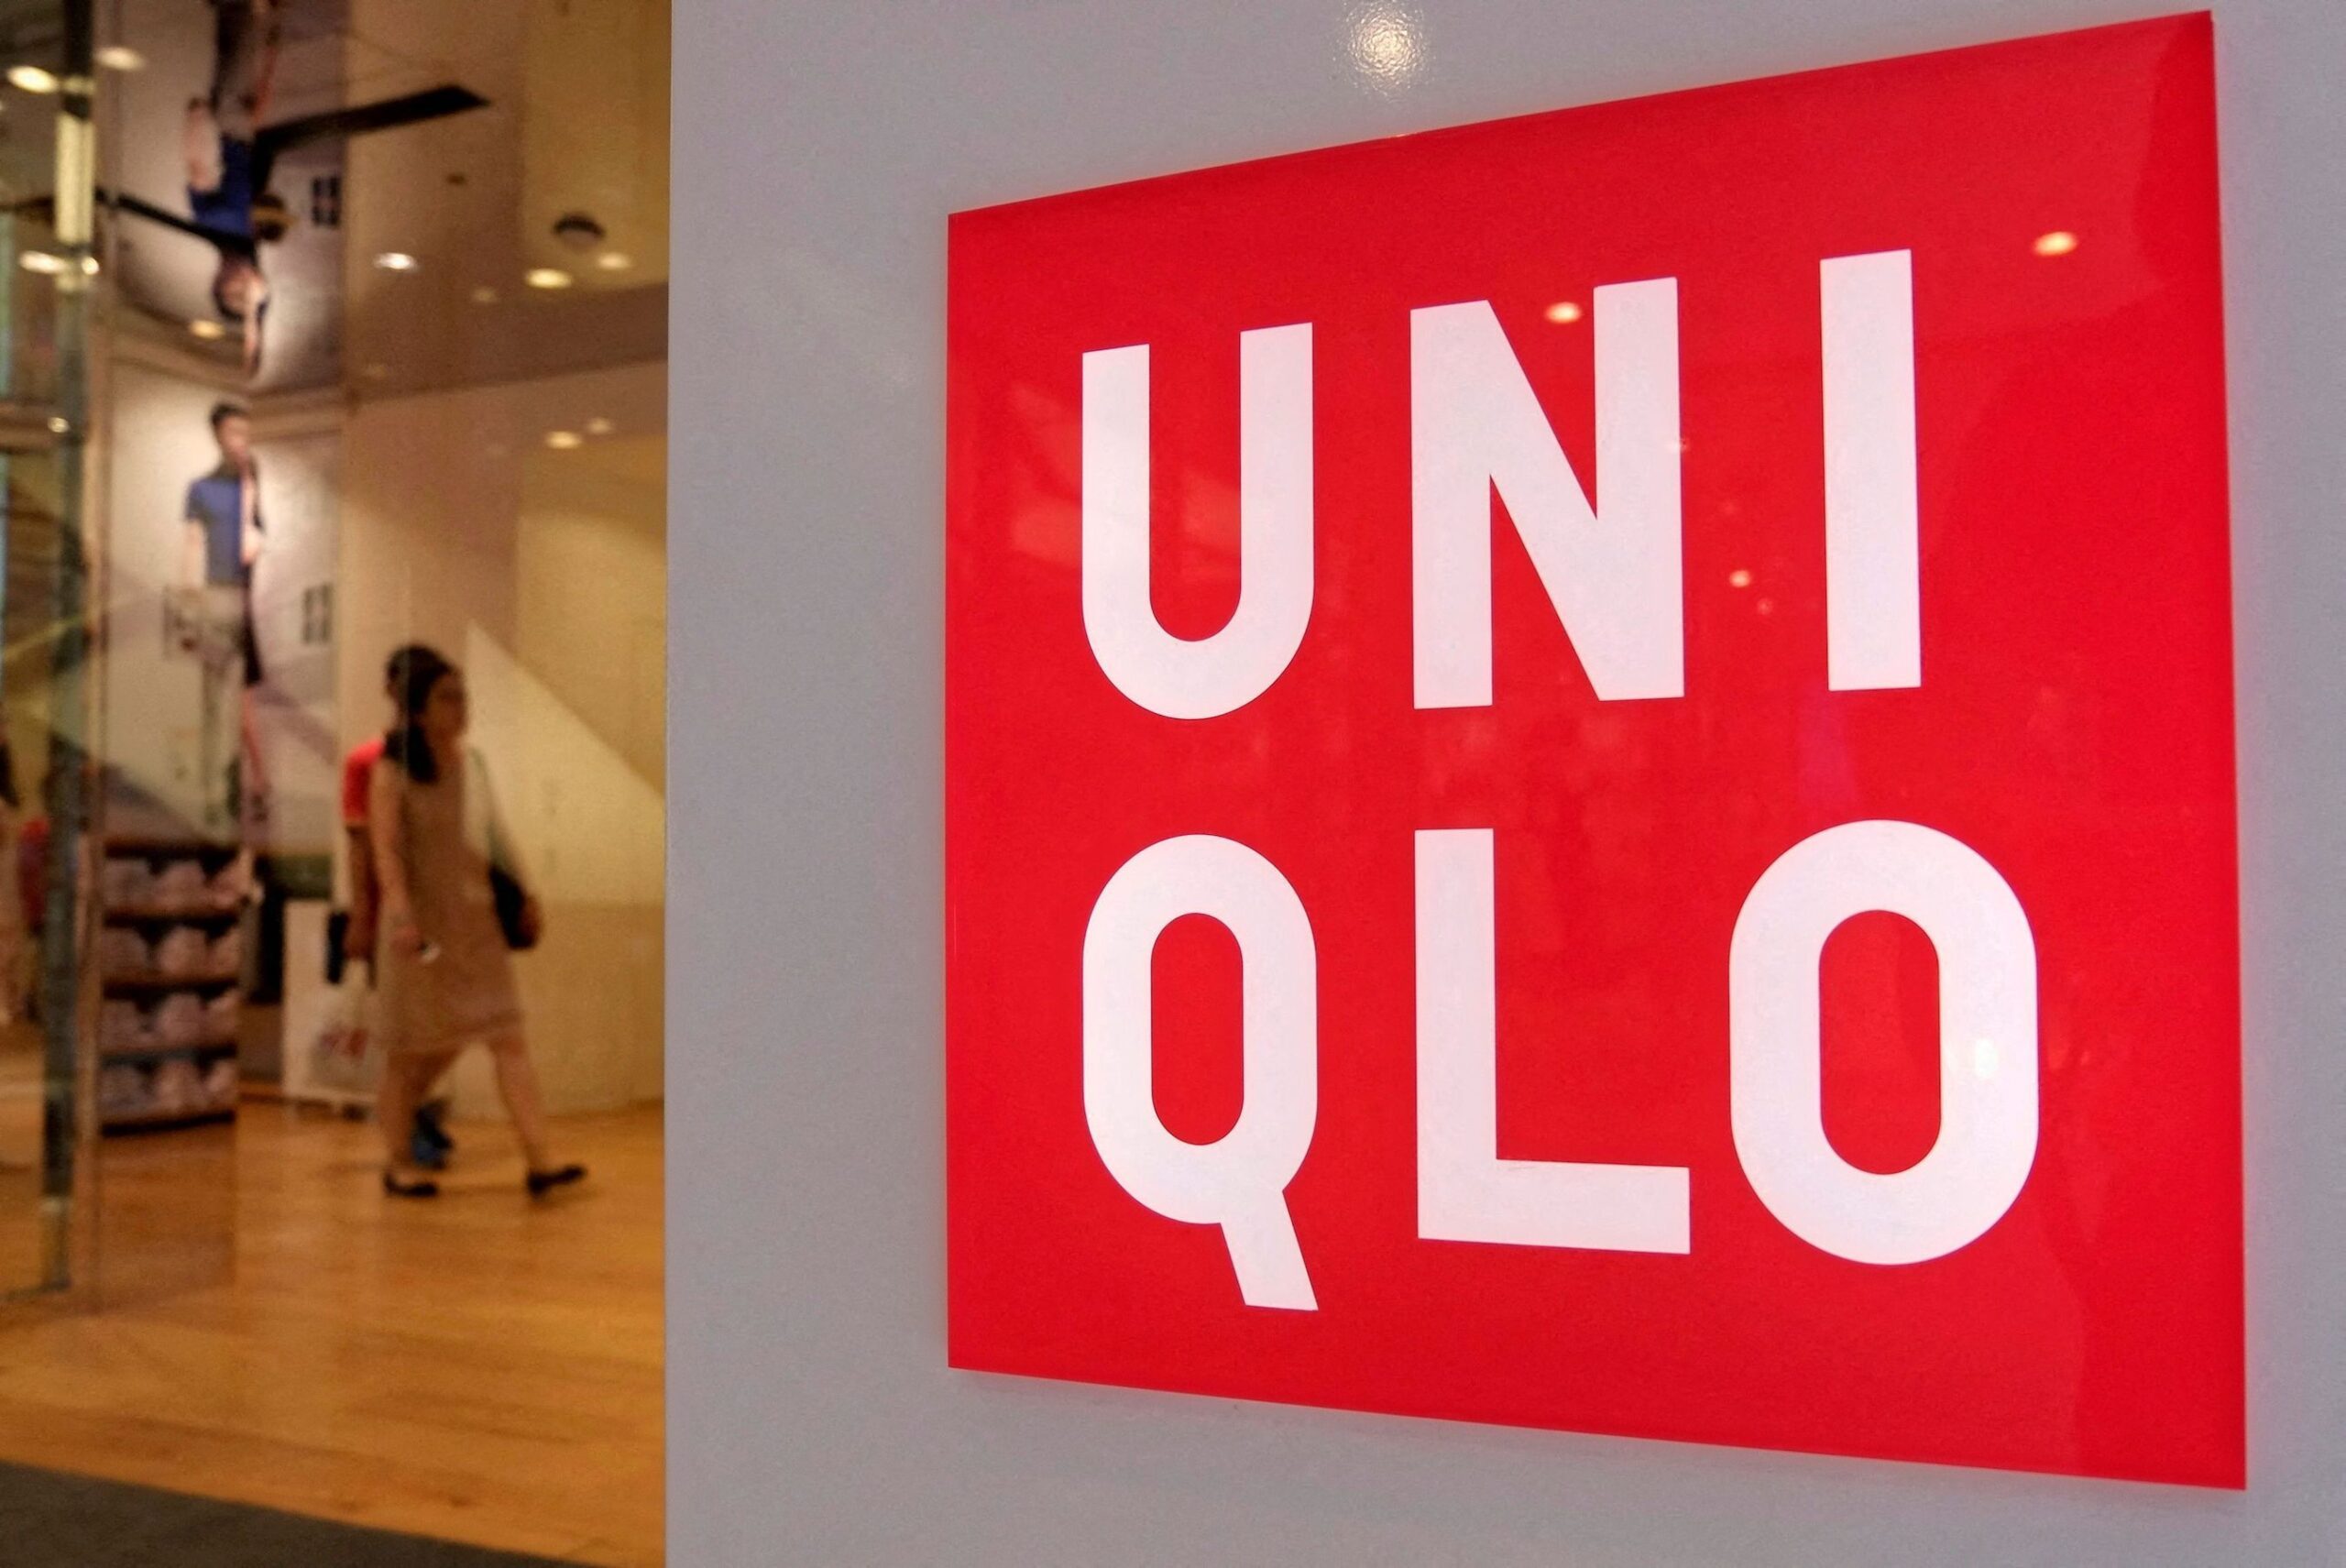 Uniqlo owner stays put in Russia as Netflix, AMEX, and others sever ties